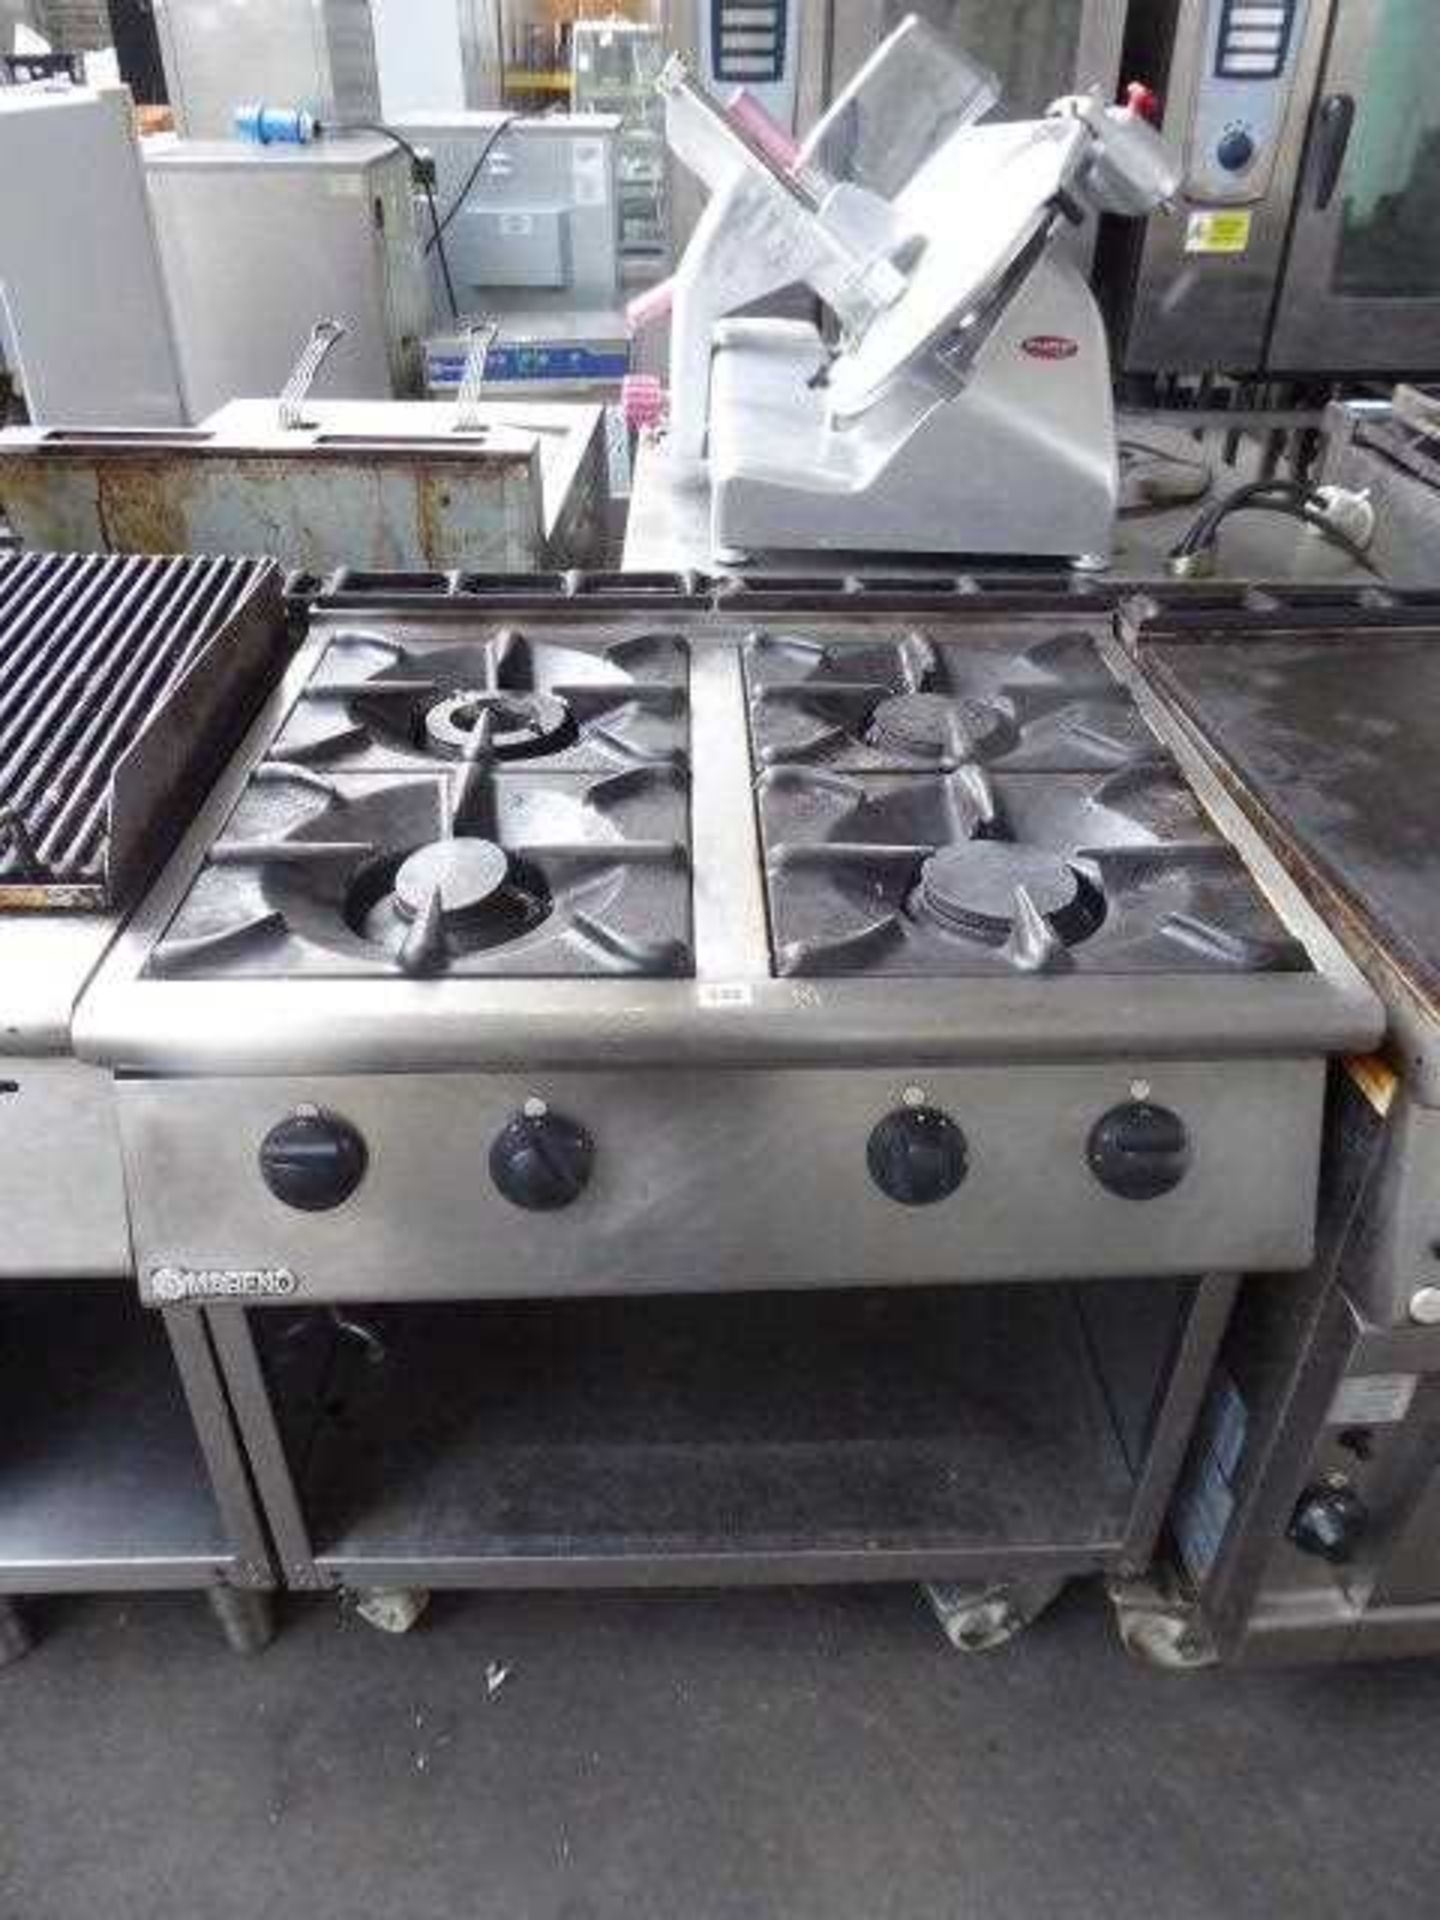 80cm gas Mareno 4-ring stove on mobile stand